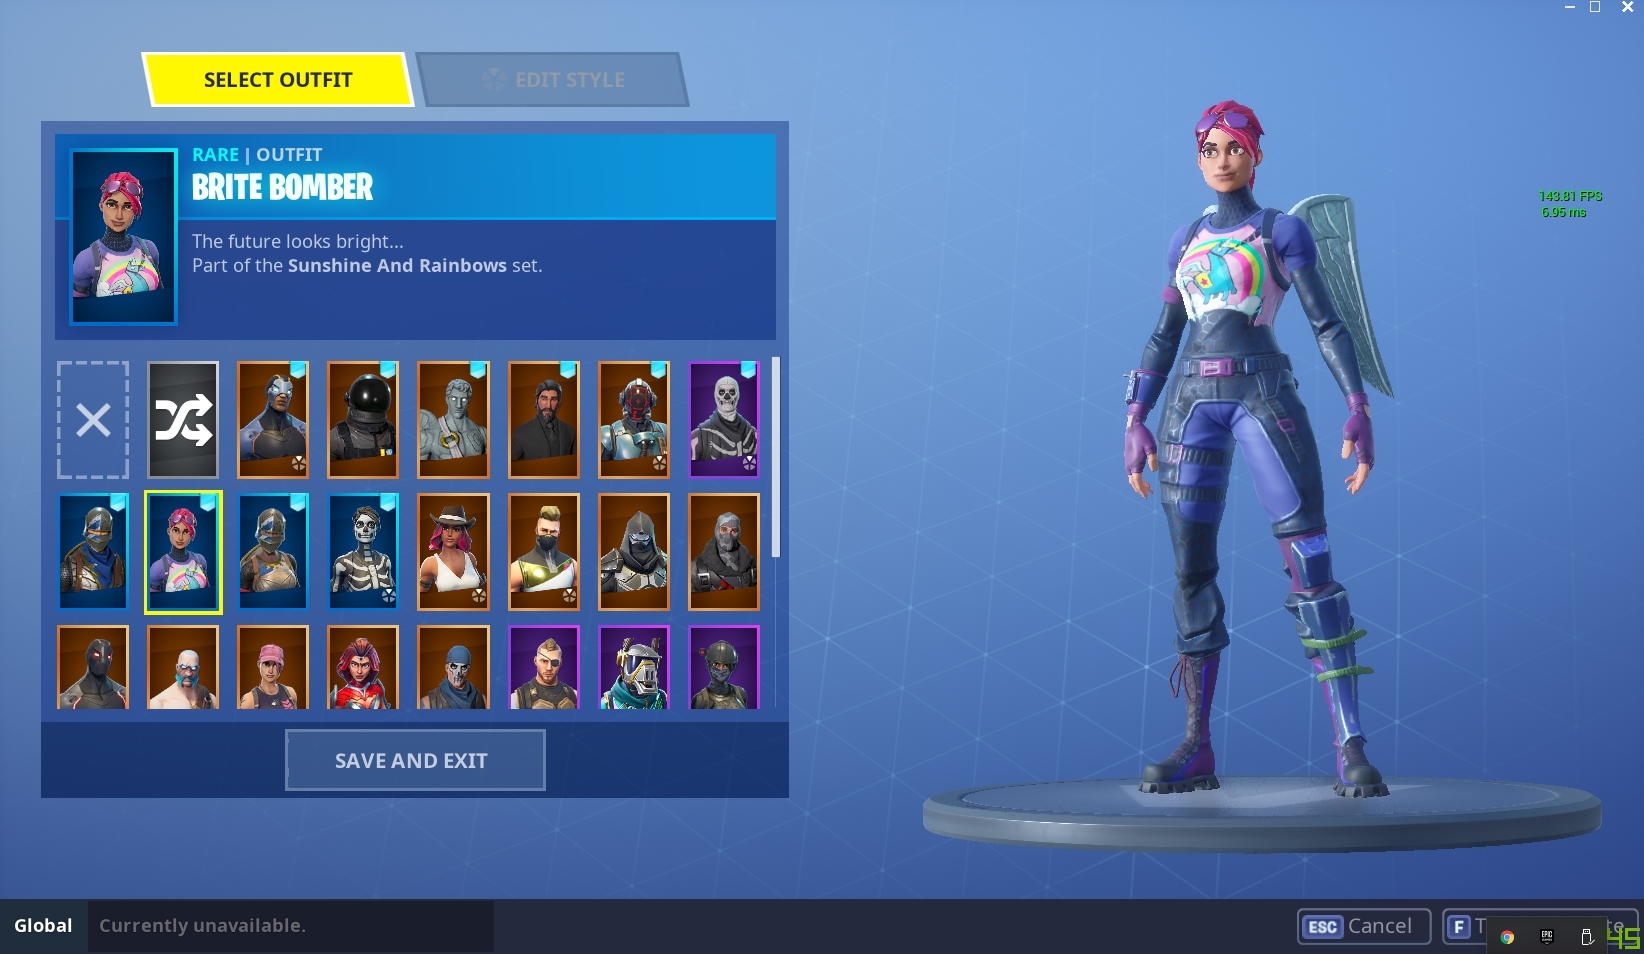 Selling Skull Trooper 0 300 Wins Email Not Included Pc Season 1 6 Pve Purple Skulltrooper Twitch Prime 1 Havoc Og Account Twitch Youtube Streamer Playerup Worlds Leading Digital Accounts Marketplace